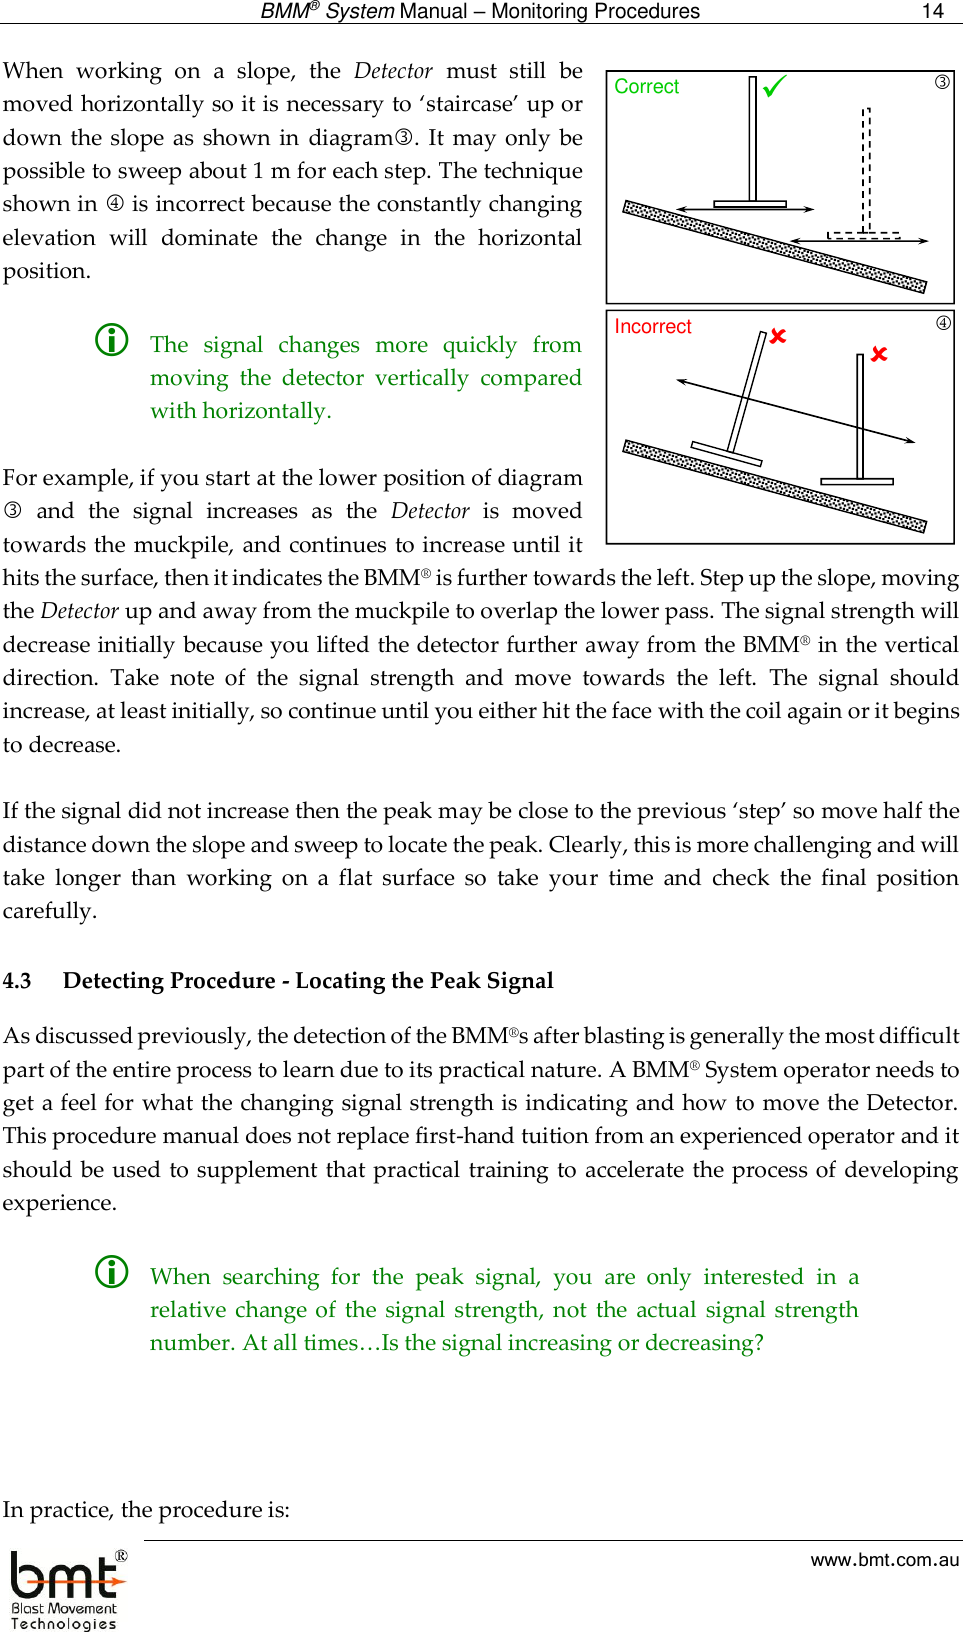  BMM® System Manual – Monitoring Procedures 14  www.bmt.com.au When  working  on  a  slope,  the  Detector  must  still  be moved horizontally so it is necessary to ‘staircase’ up or down  the  slope as  shown  in  diagram.  It may only  be possible to sweep about 1 m for each step. The technique shown in  is incorrect because the constantly changing elevation  will  dominate  the  change  in  the  horizontal position.    The  signal  changes  more  quickly  from moving  the  detector  vertically  compared with horizontally.  For example, if you start at the lower position of diagram   and  the  signal  increases  as  the  Detector  is  moved towards the muckpile, and continues to increase until it hits the surface, then it indicates the BMM® is further towards the left. Step up the slope, moving the Detector up and away from the muckpile to overlap the lower pass. The signal strength will decrease initially because you lifted the detector further away from the BMM® in the vertical direction.  Take  note  of  the  signal  strength  and  move  towards  the  left.  The  signal  should increase, at least initially, so continue until you either hit the face with the coil again or it begins to decrease.   If the signal did not increase then the peak may be close to the previous ‘step’ so move half the distance down the slope and sweep to locate the peak. Clearly, this is more challenging and will take  longer  than  working  on  a  flat  surface  so  take  your  time  and  check  the  final  position carefully.  4.3 Detecting Procedure - Locating the Peak Signal As discussed previously, the detection of the BMM®s after blasting is generally the most difficult part of the entire process to learn due to its practical nature. A BMM® System operator needs to get a feel for what the changing signal strength is indicating and how to move the Detector. This procedure manual does not replace first-hand tuition from an experienced operator and it should be used to supplement  that practical training to accelerate the process of developing experience.   When  searching  for  the  peak  signal,  you  are  only  interested  in  a relative change  of  the  signal strength,  not  the  actual  signal  strength number. At all times…Is the signal increasing or decreasing?     In practice, the procedure is: Correct Incorrect 